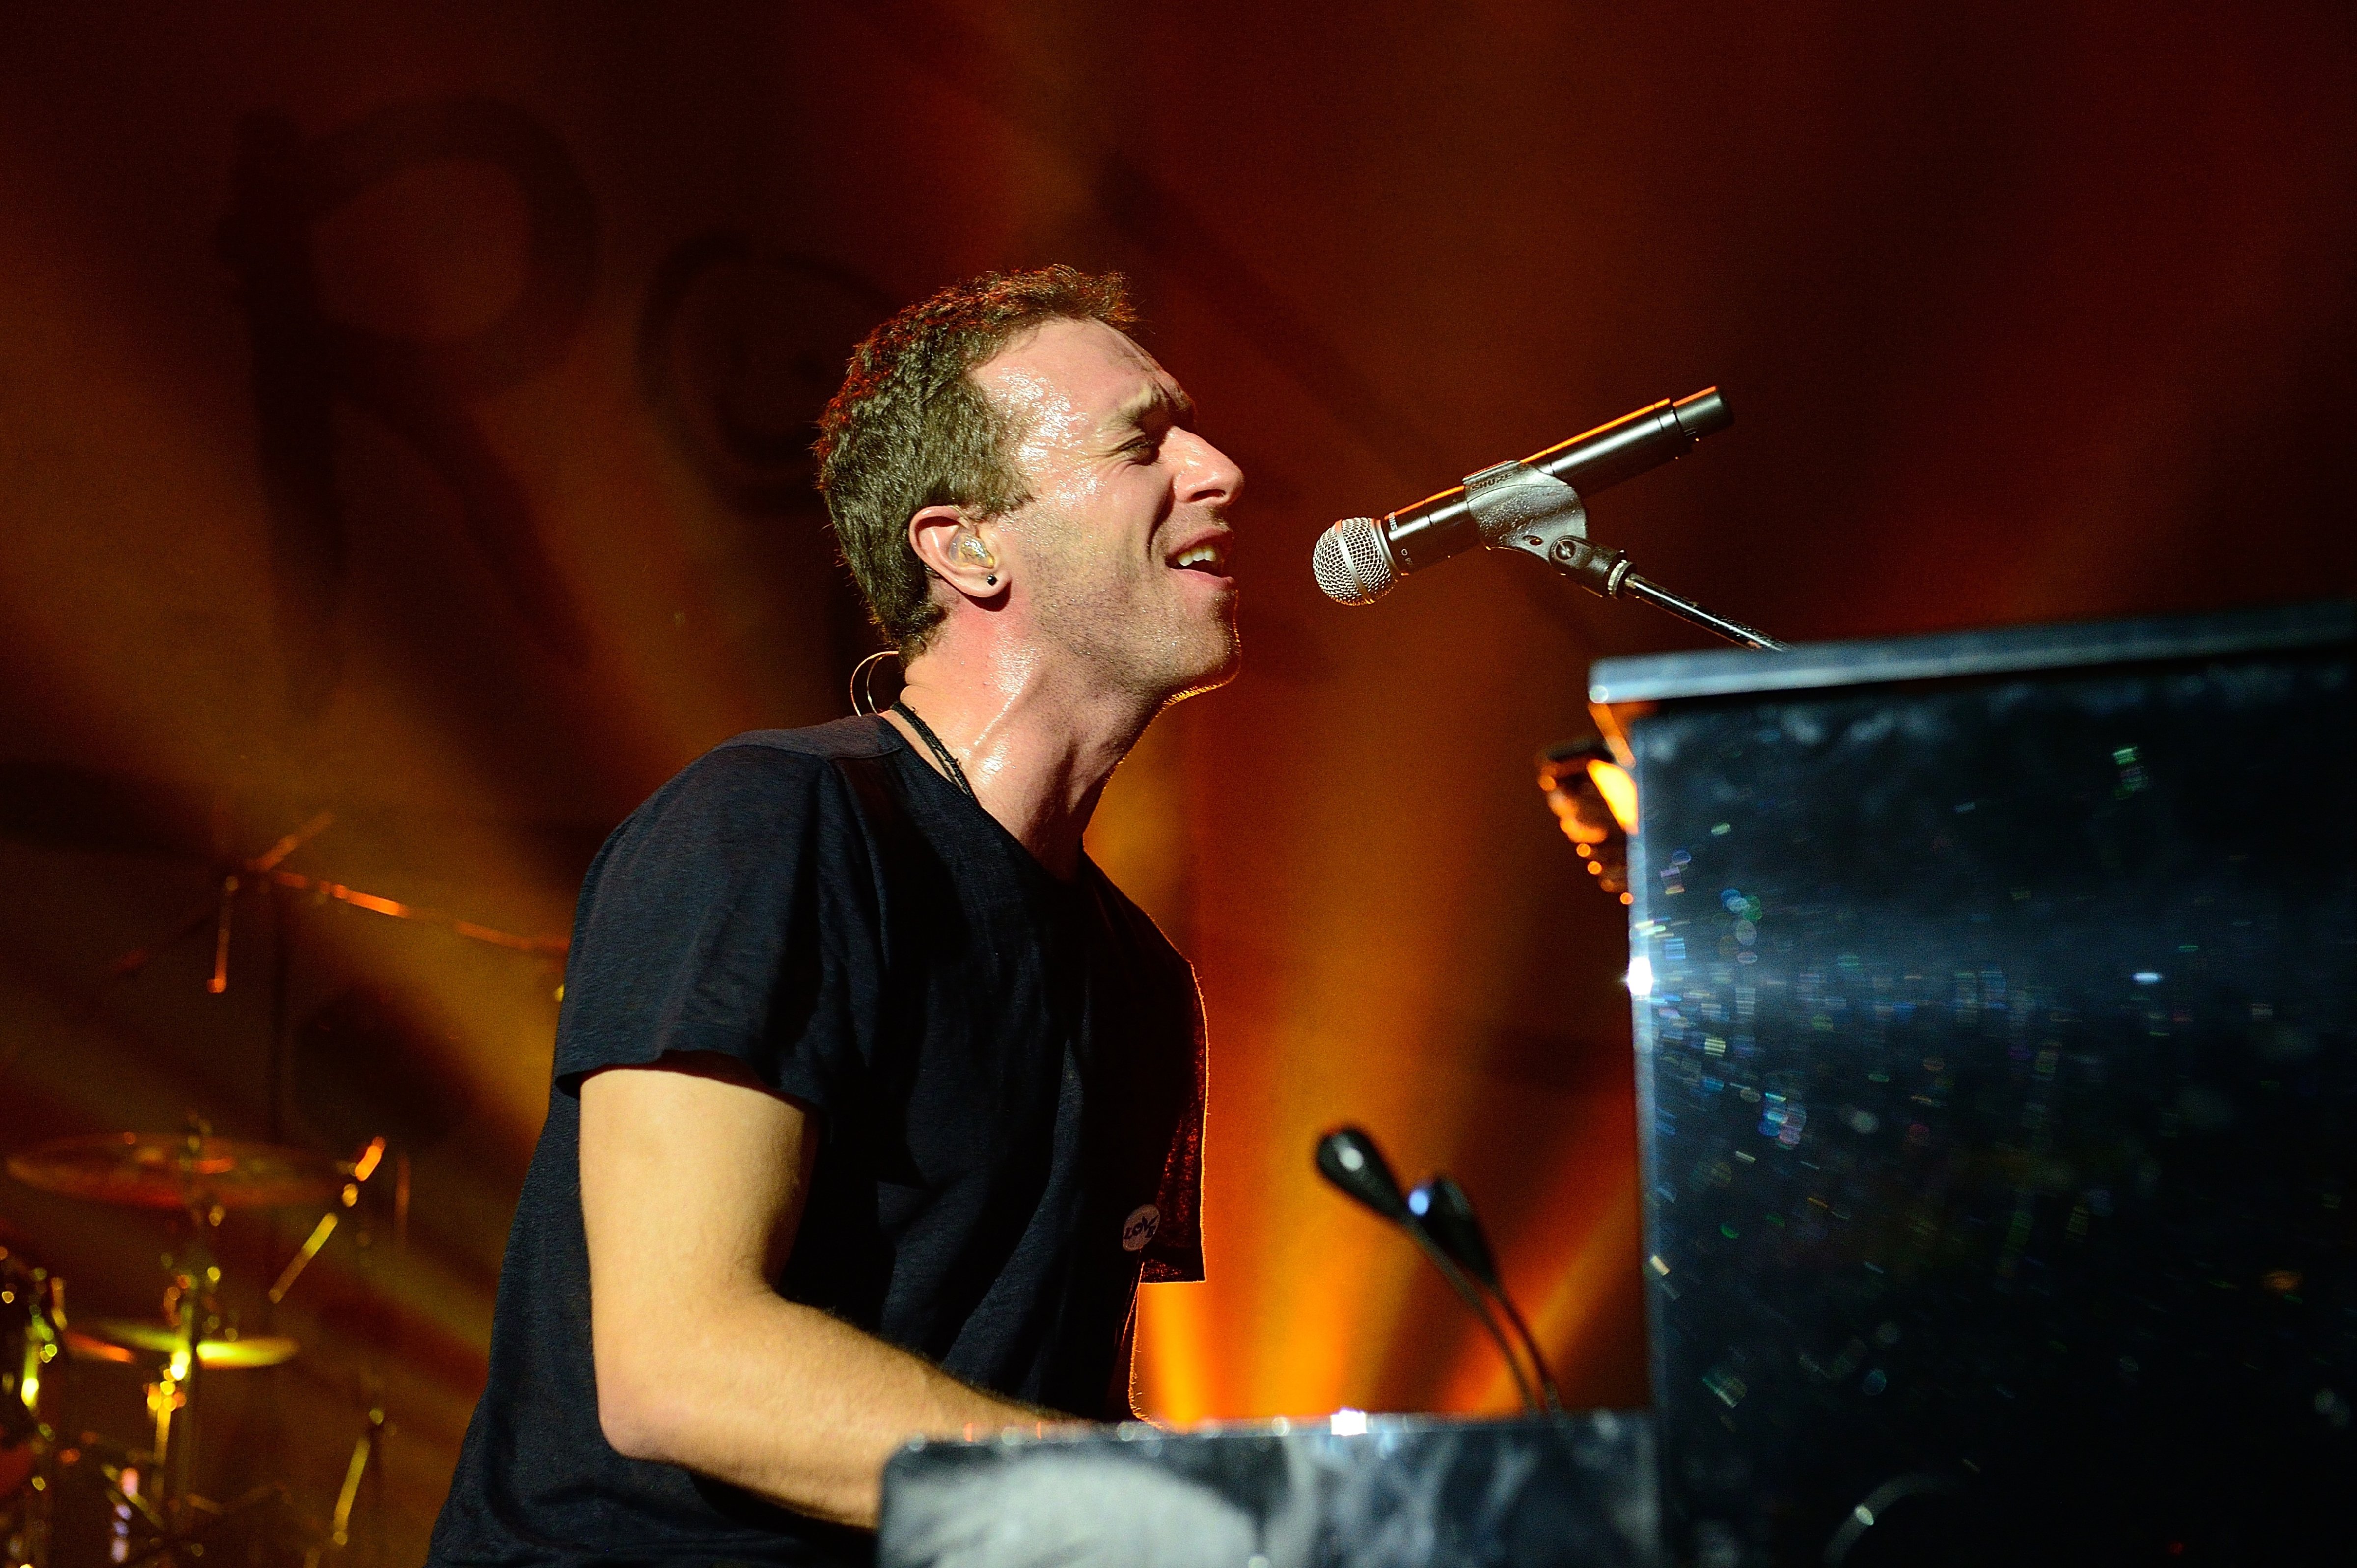 Chris Martin of Coldplay performs on stage at the 'Under 1 Roof' concert in aid of Kids Company at Hammersmith Apollo on December 19, 2013 in London, England. (Gus Stewart—Redferns/Getty Images)